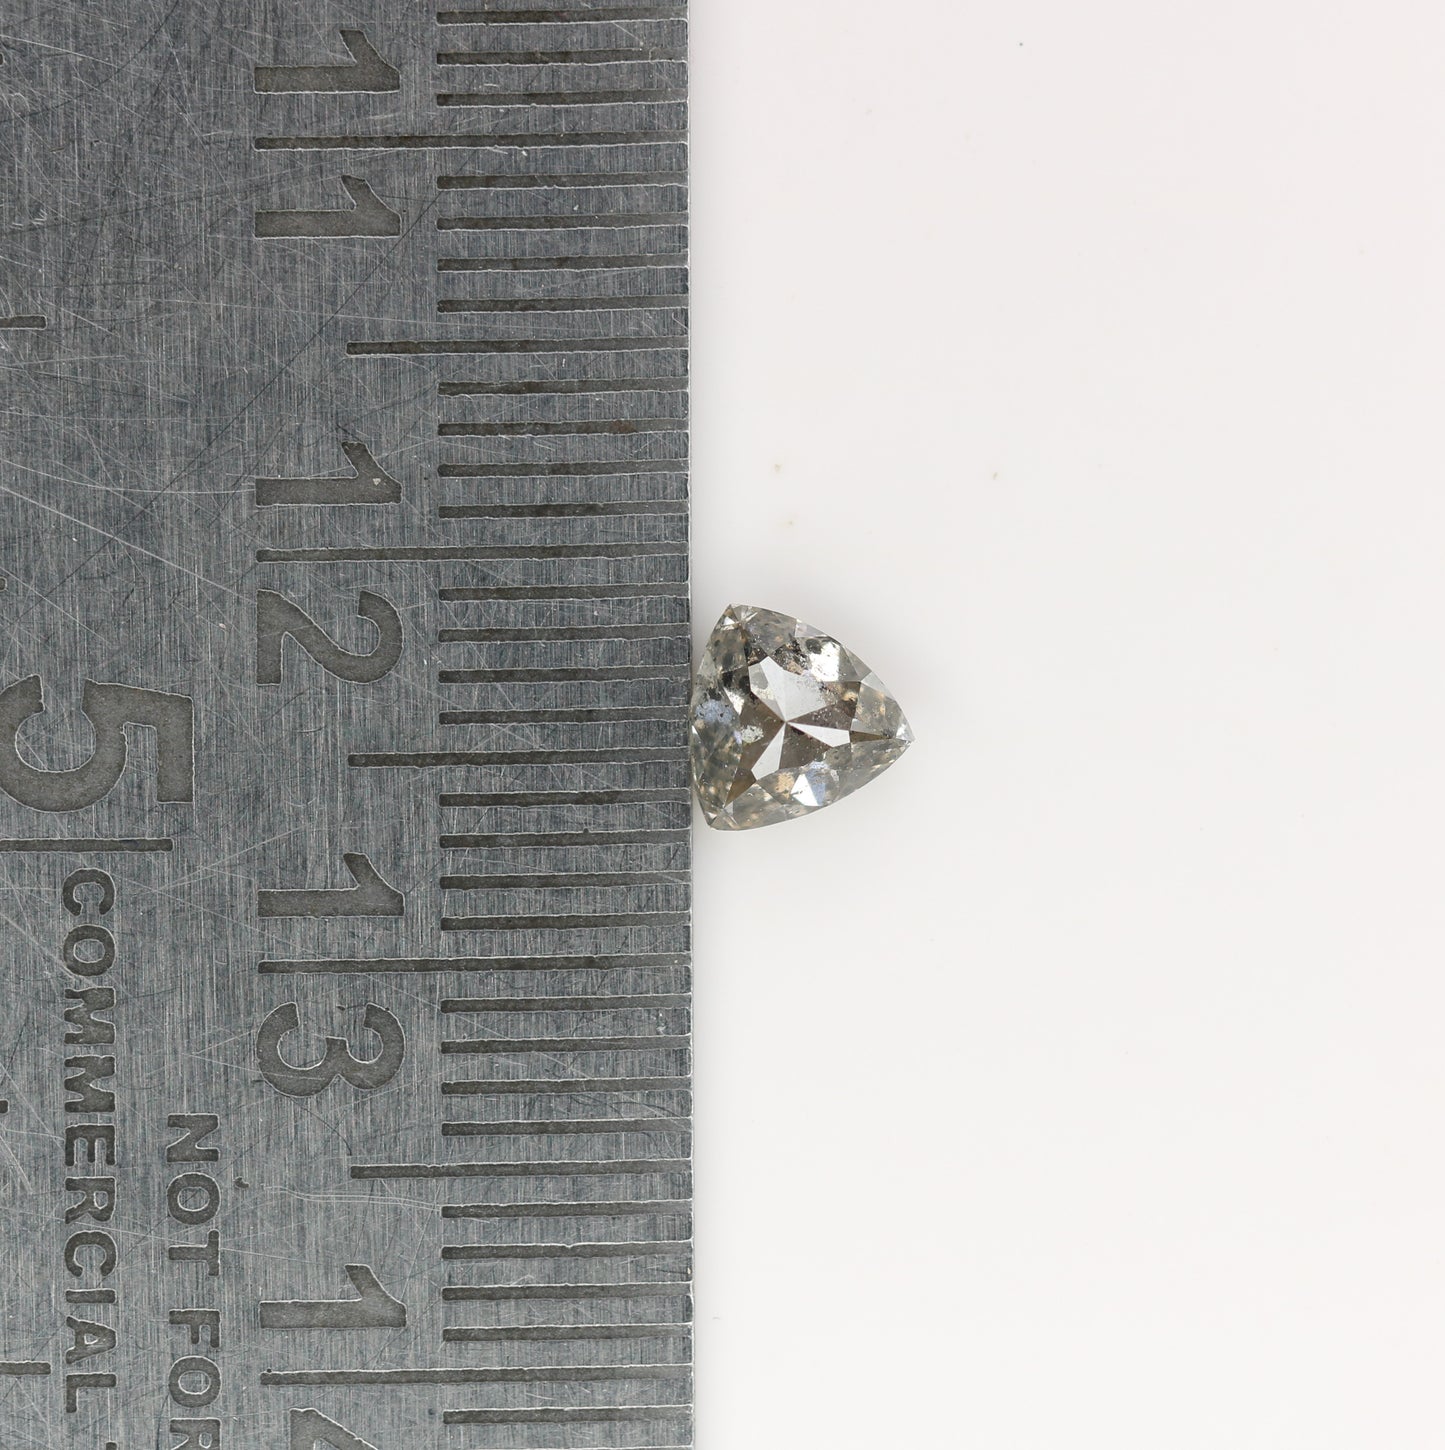 0.66 CT Natural Grey Galaxy Trillion Shape Salt And Pepper Diamond For Her